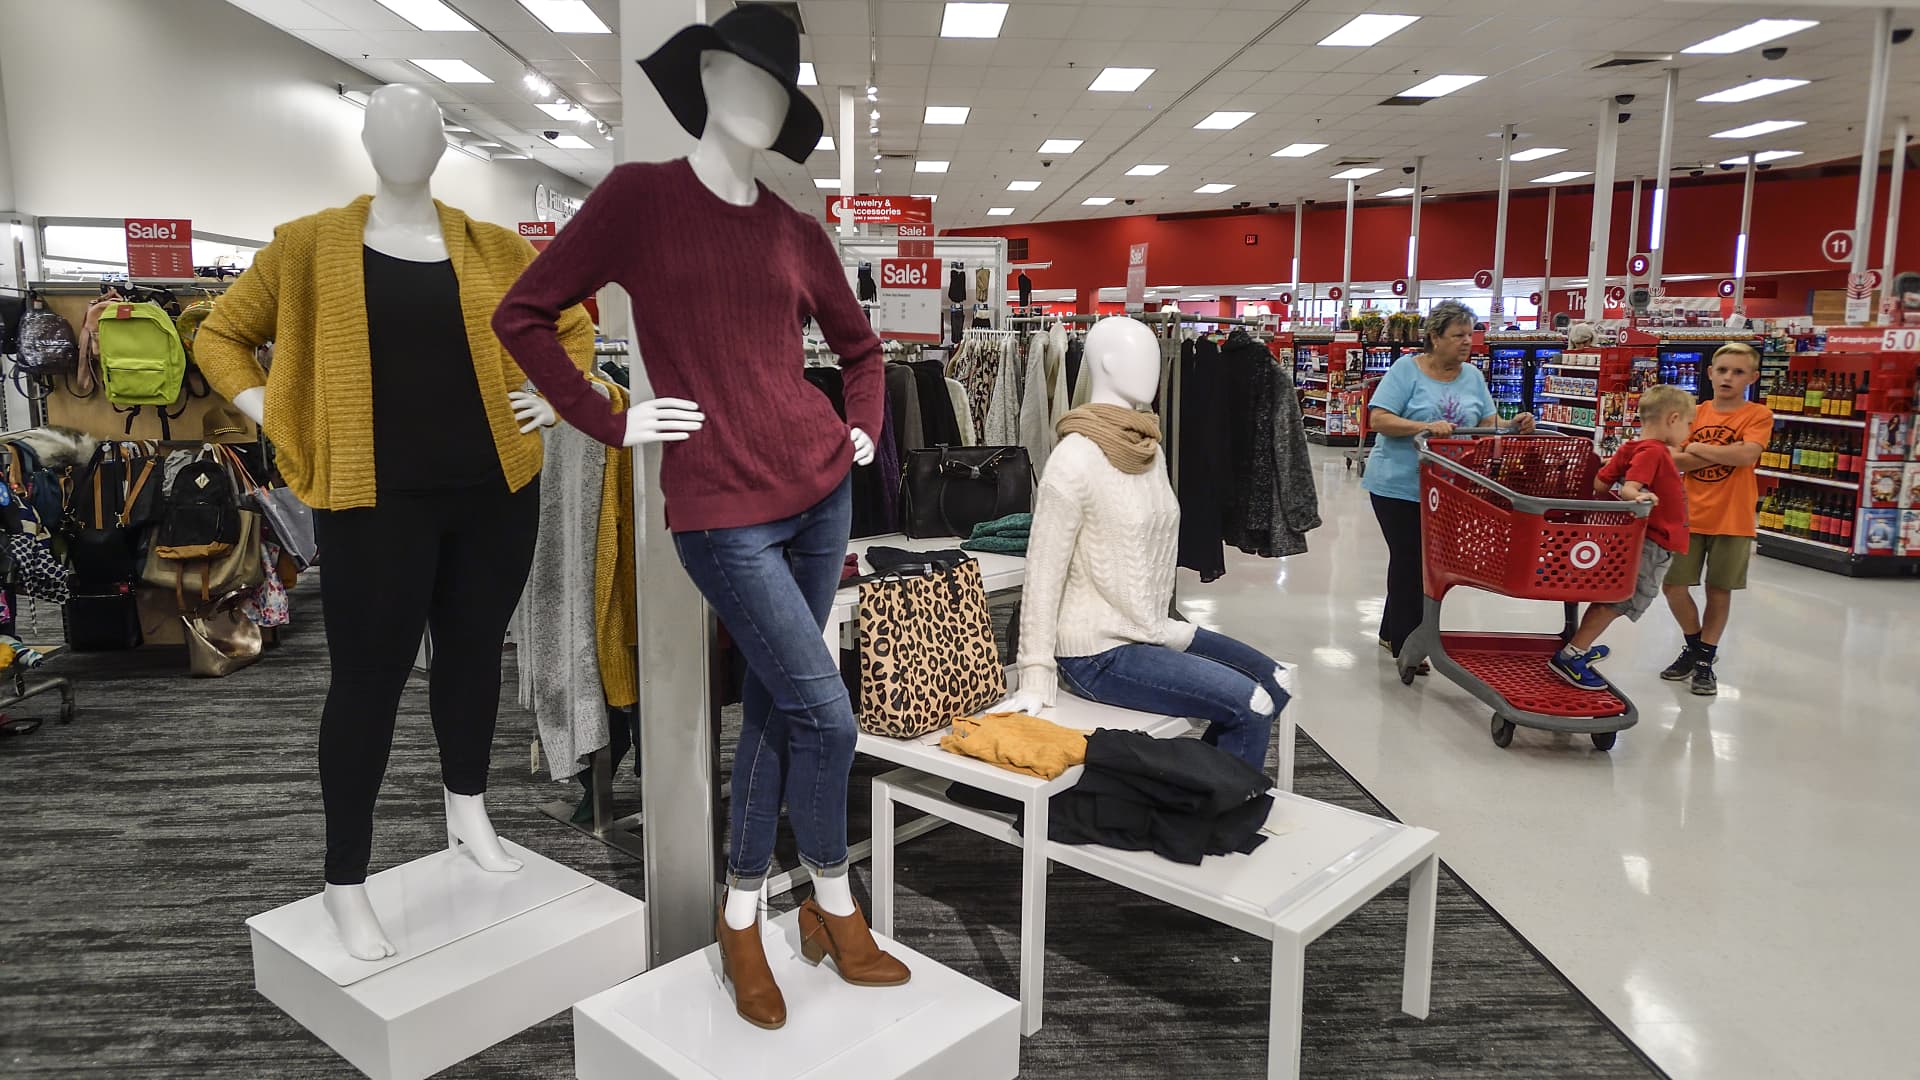 An increased number of mannequins feature clothing and shoes throughout the remodeled Target store in Orange, California.